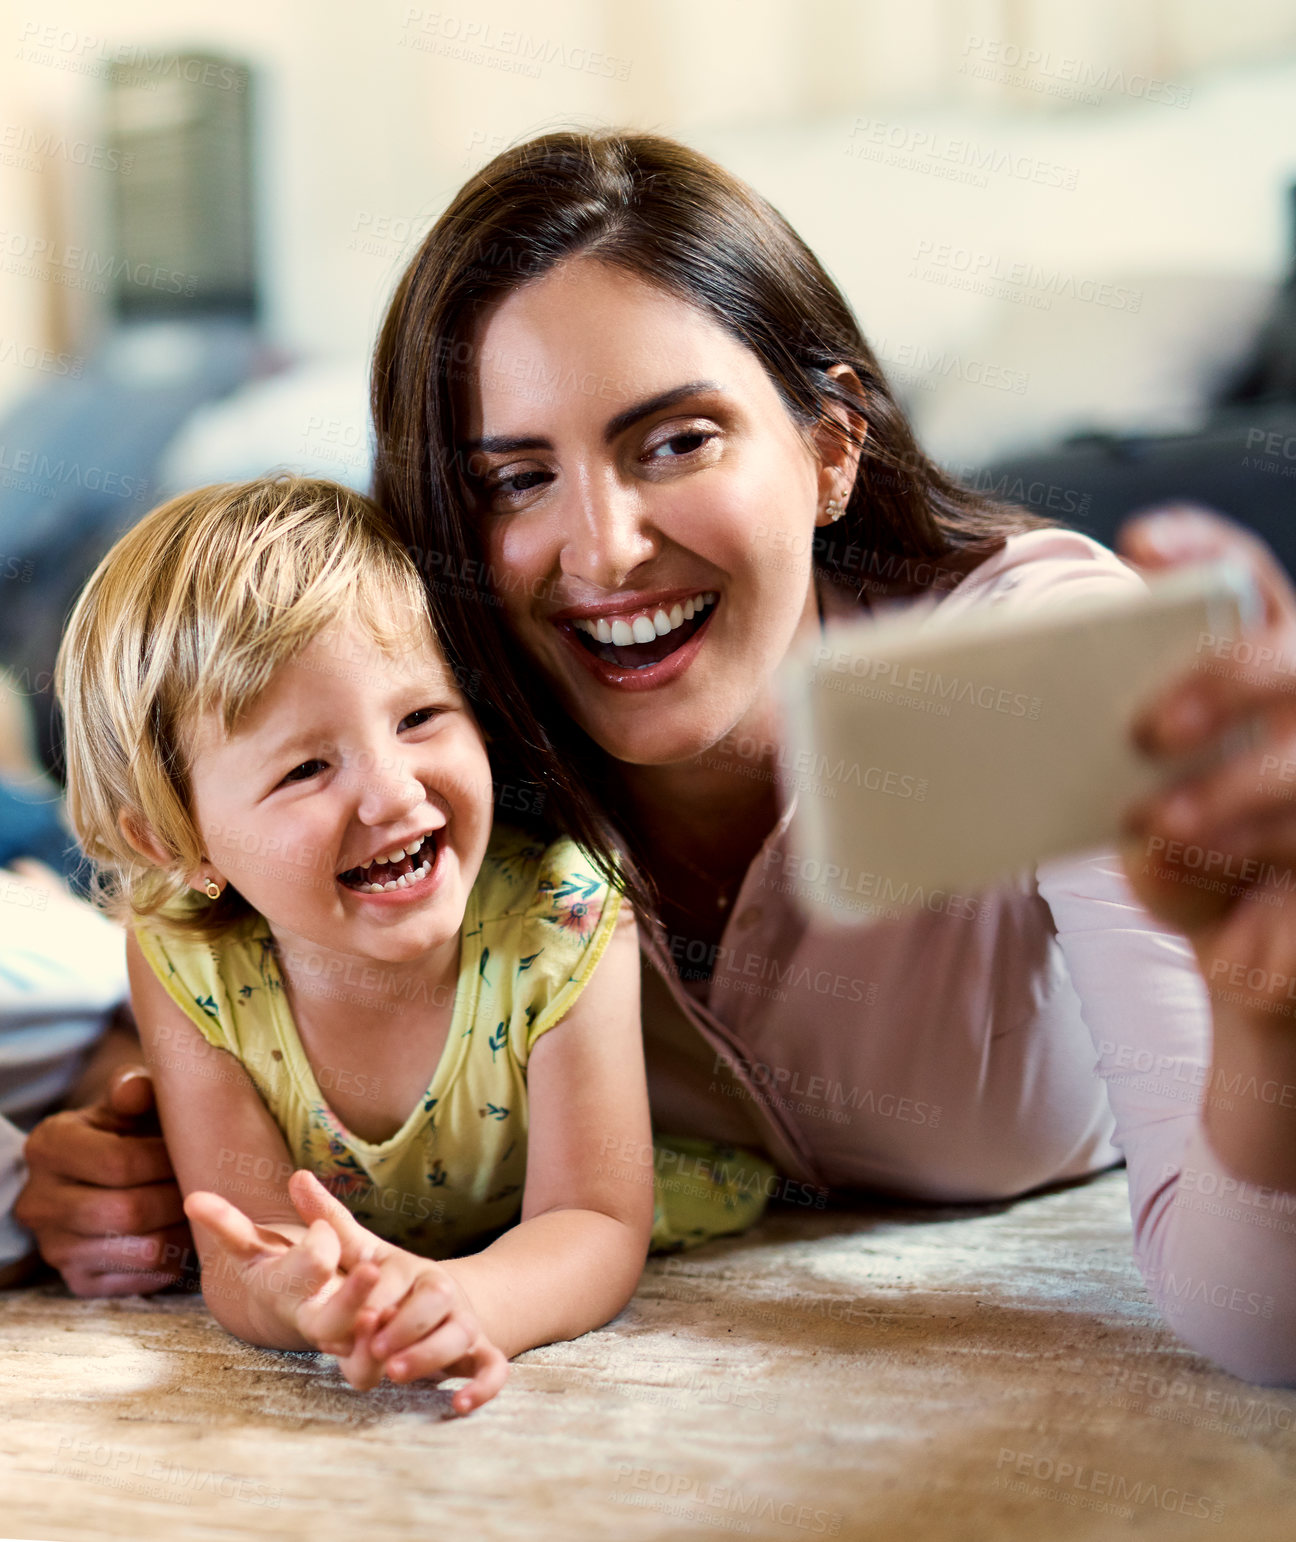 Buy stock photo Shot of a happy mother and her adorable daughter taking selfies together at home